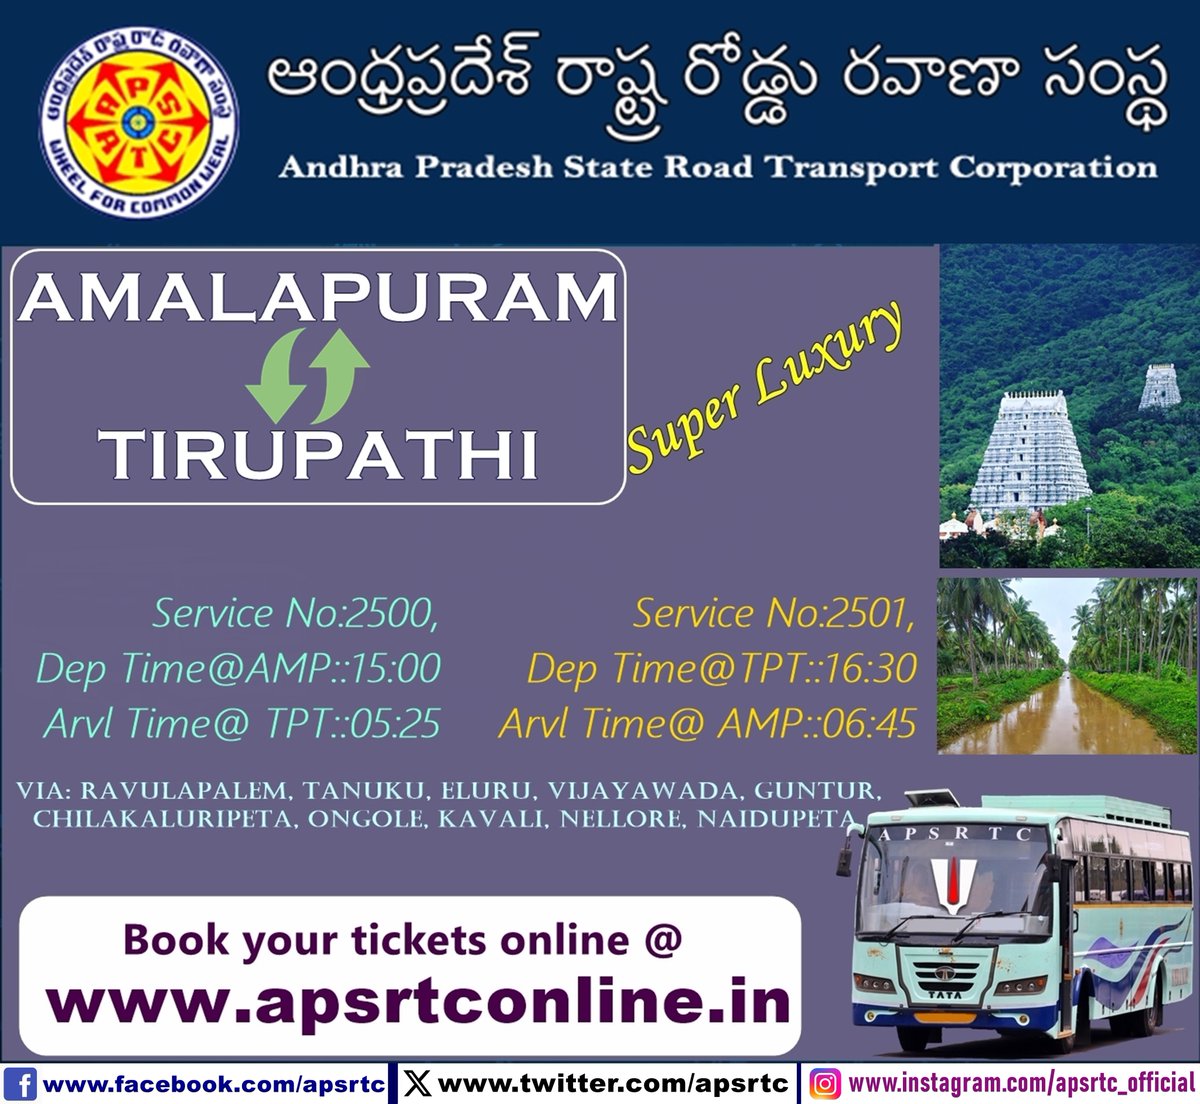 APSRTC is Operating Super Luxury Services for Amalapuram - Tirupathi For Bookings Please Visit apsrtconline.in